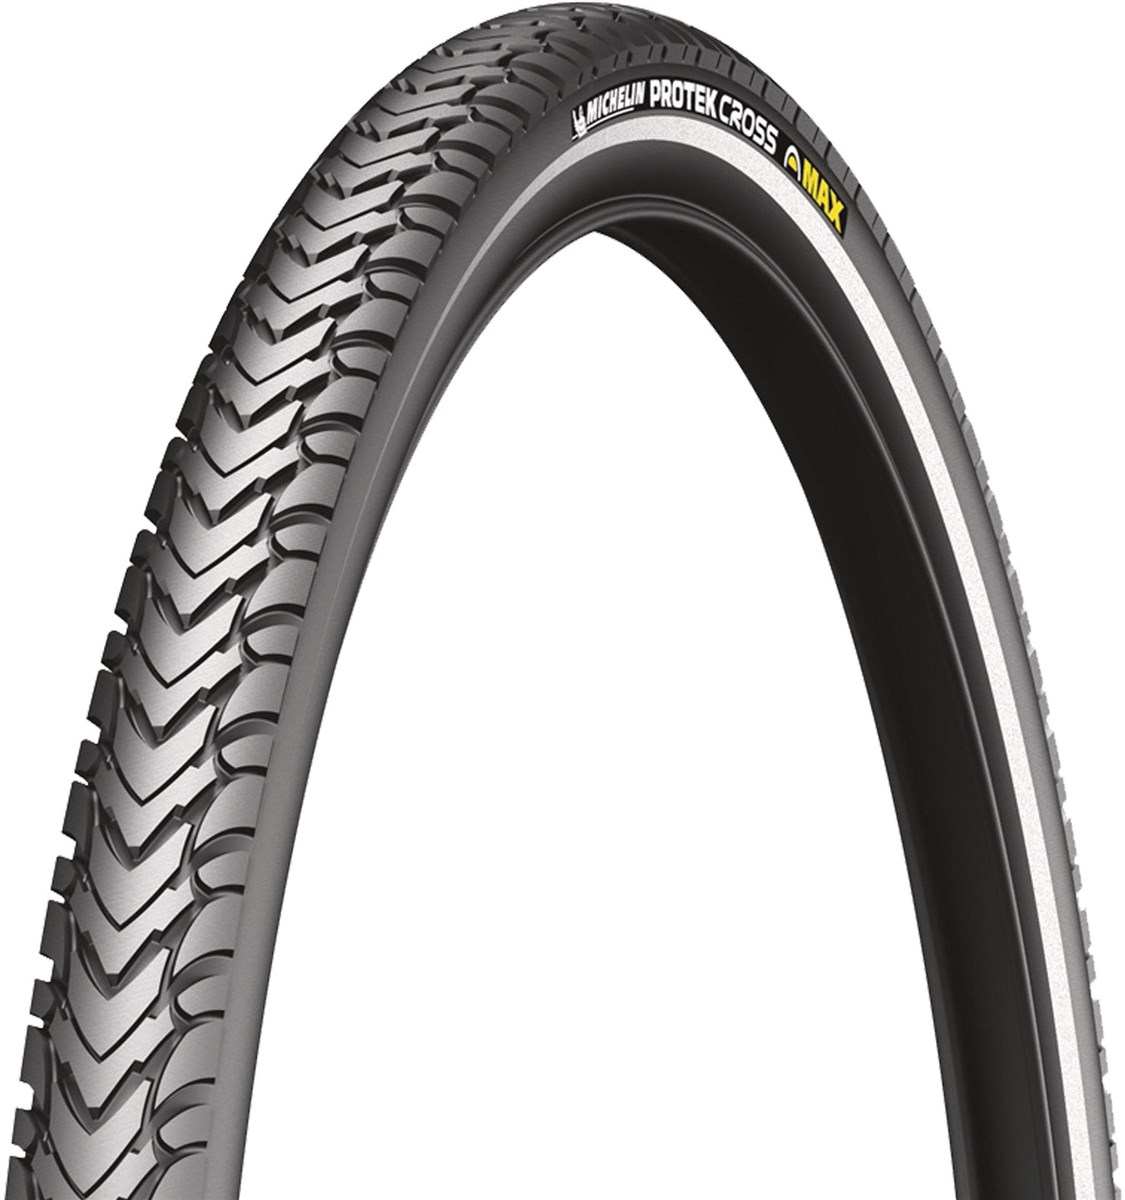 Michelin Protek Cross Max Tyre product image